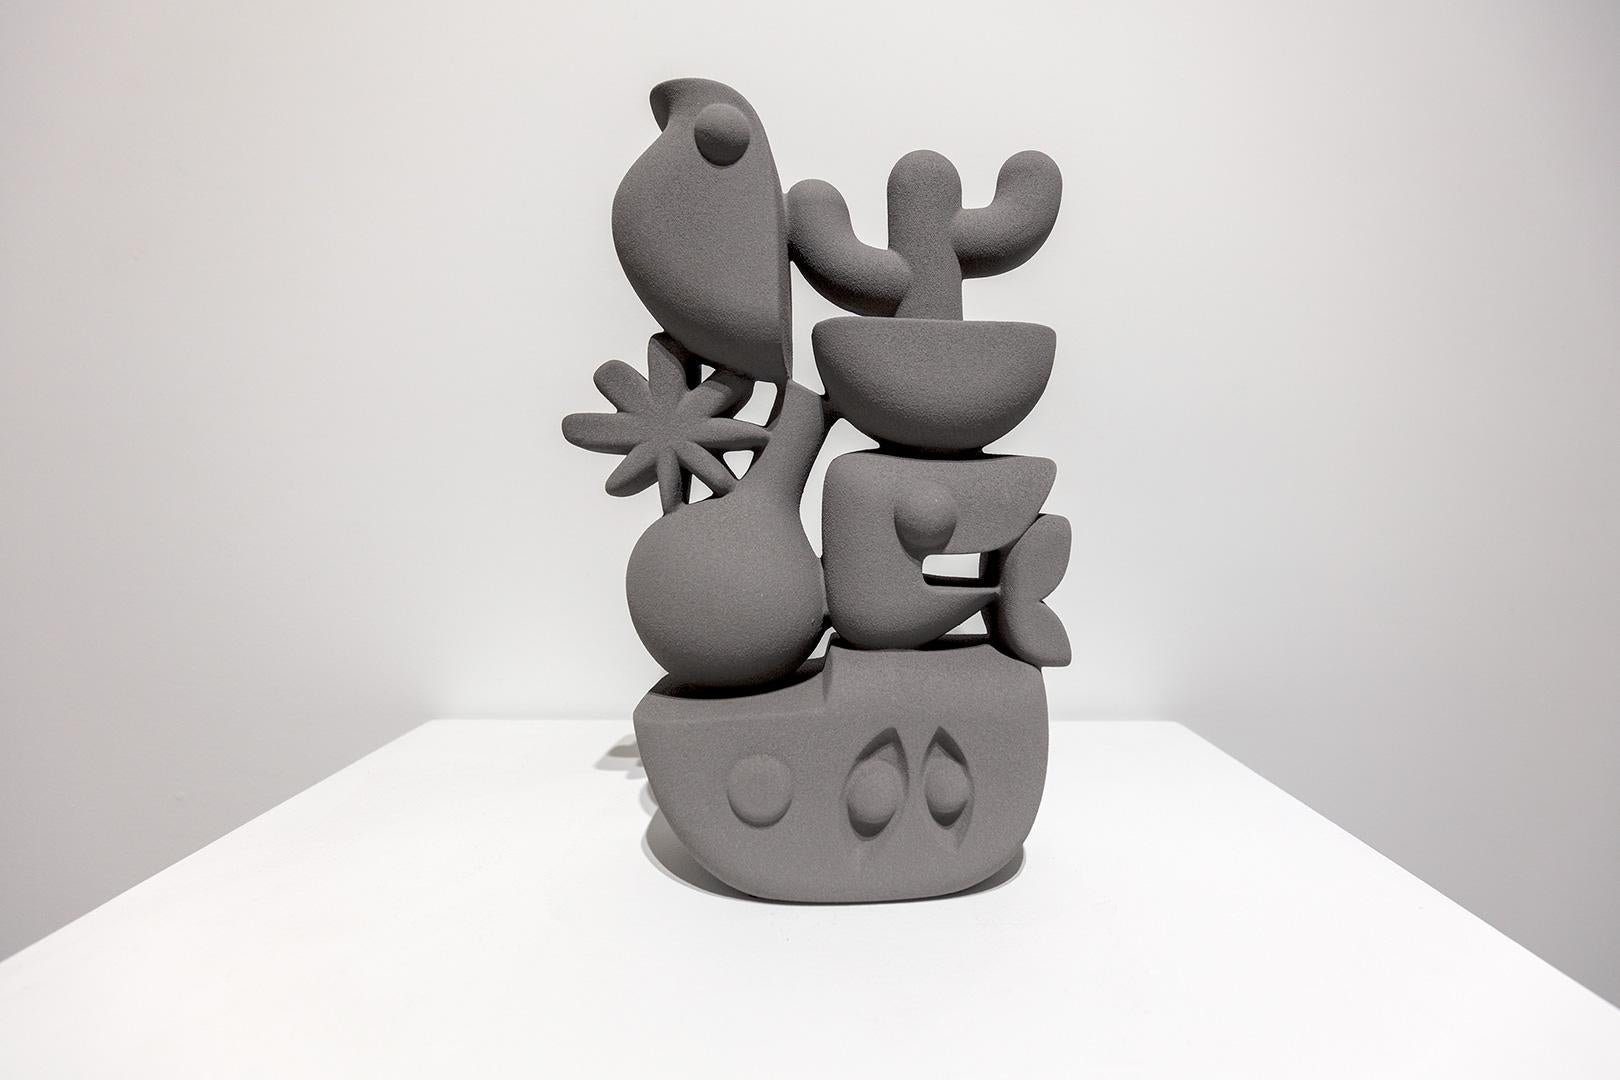 Ceramic sculpture 6/25. Sanchez’s two sculptures, “Ungravity” and “Equilibrio,” represent two states of balance. The infinitive, to balance, becomes something we humans are tasked with in different ways throughout our lives. These works, large and